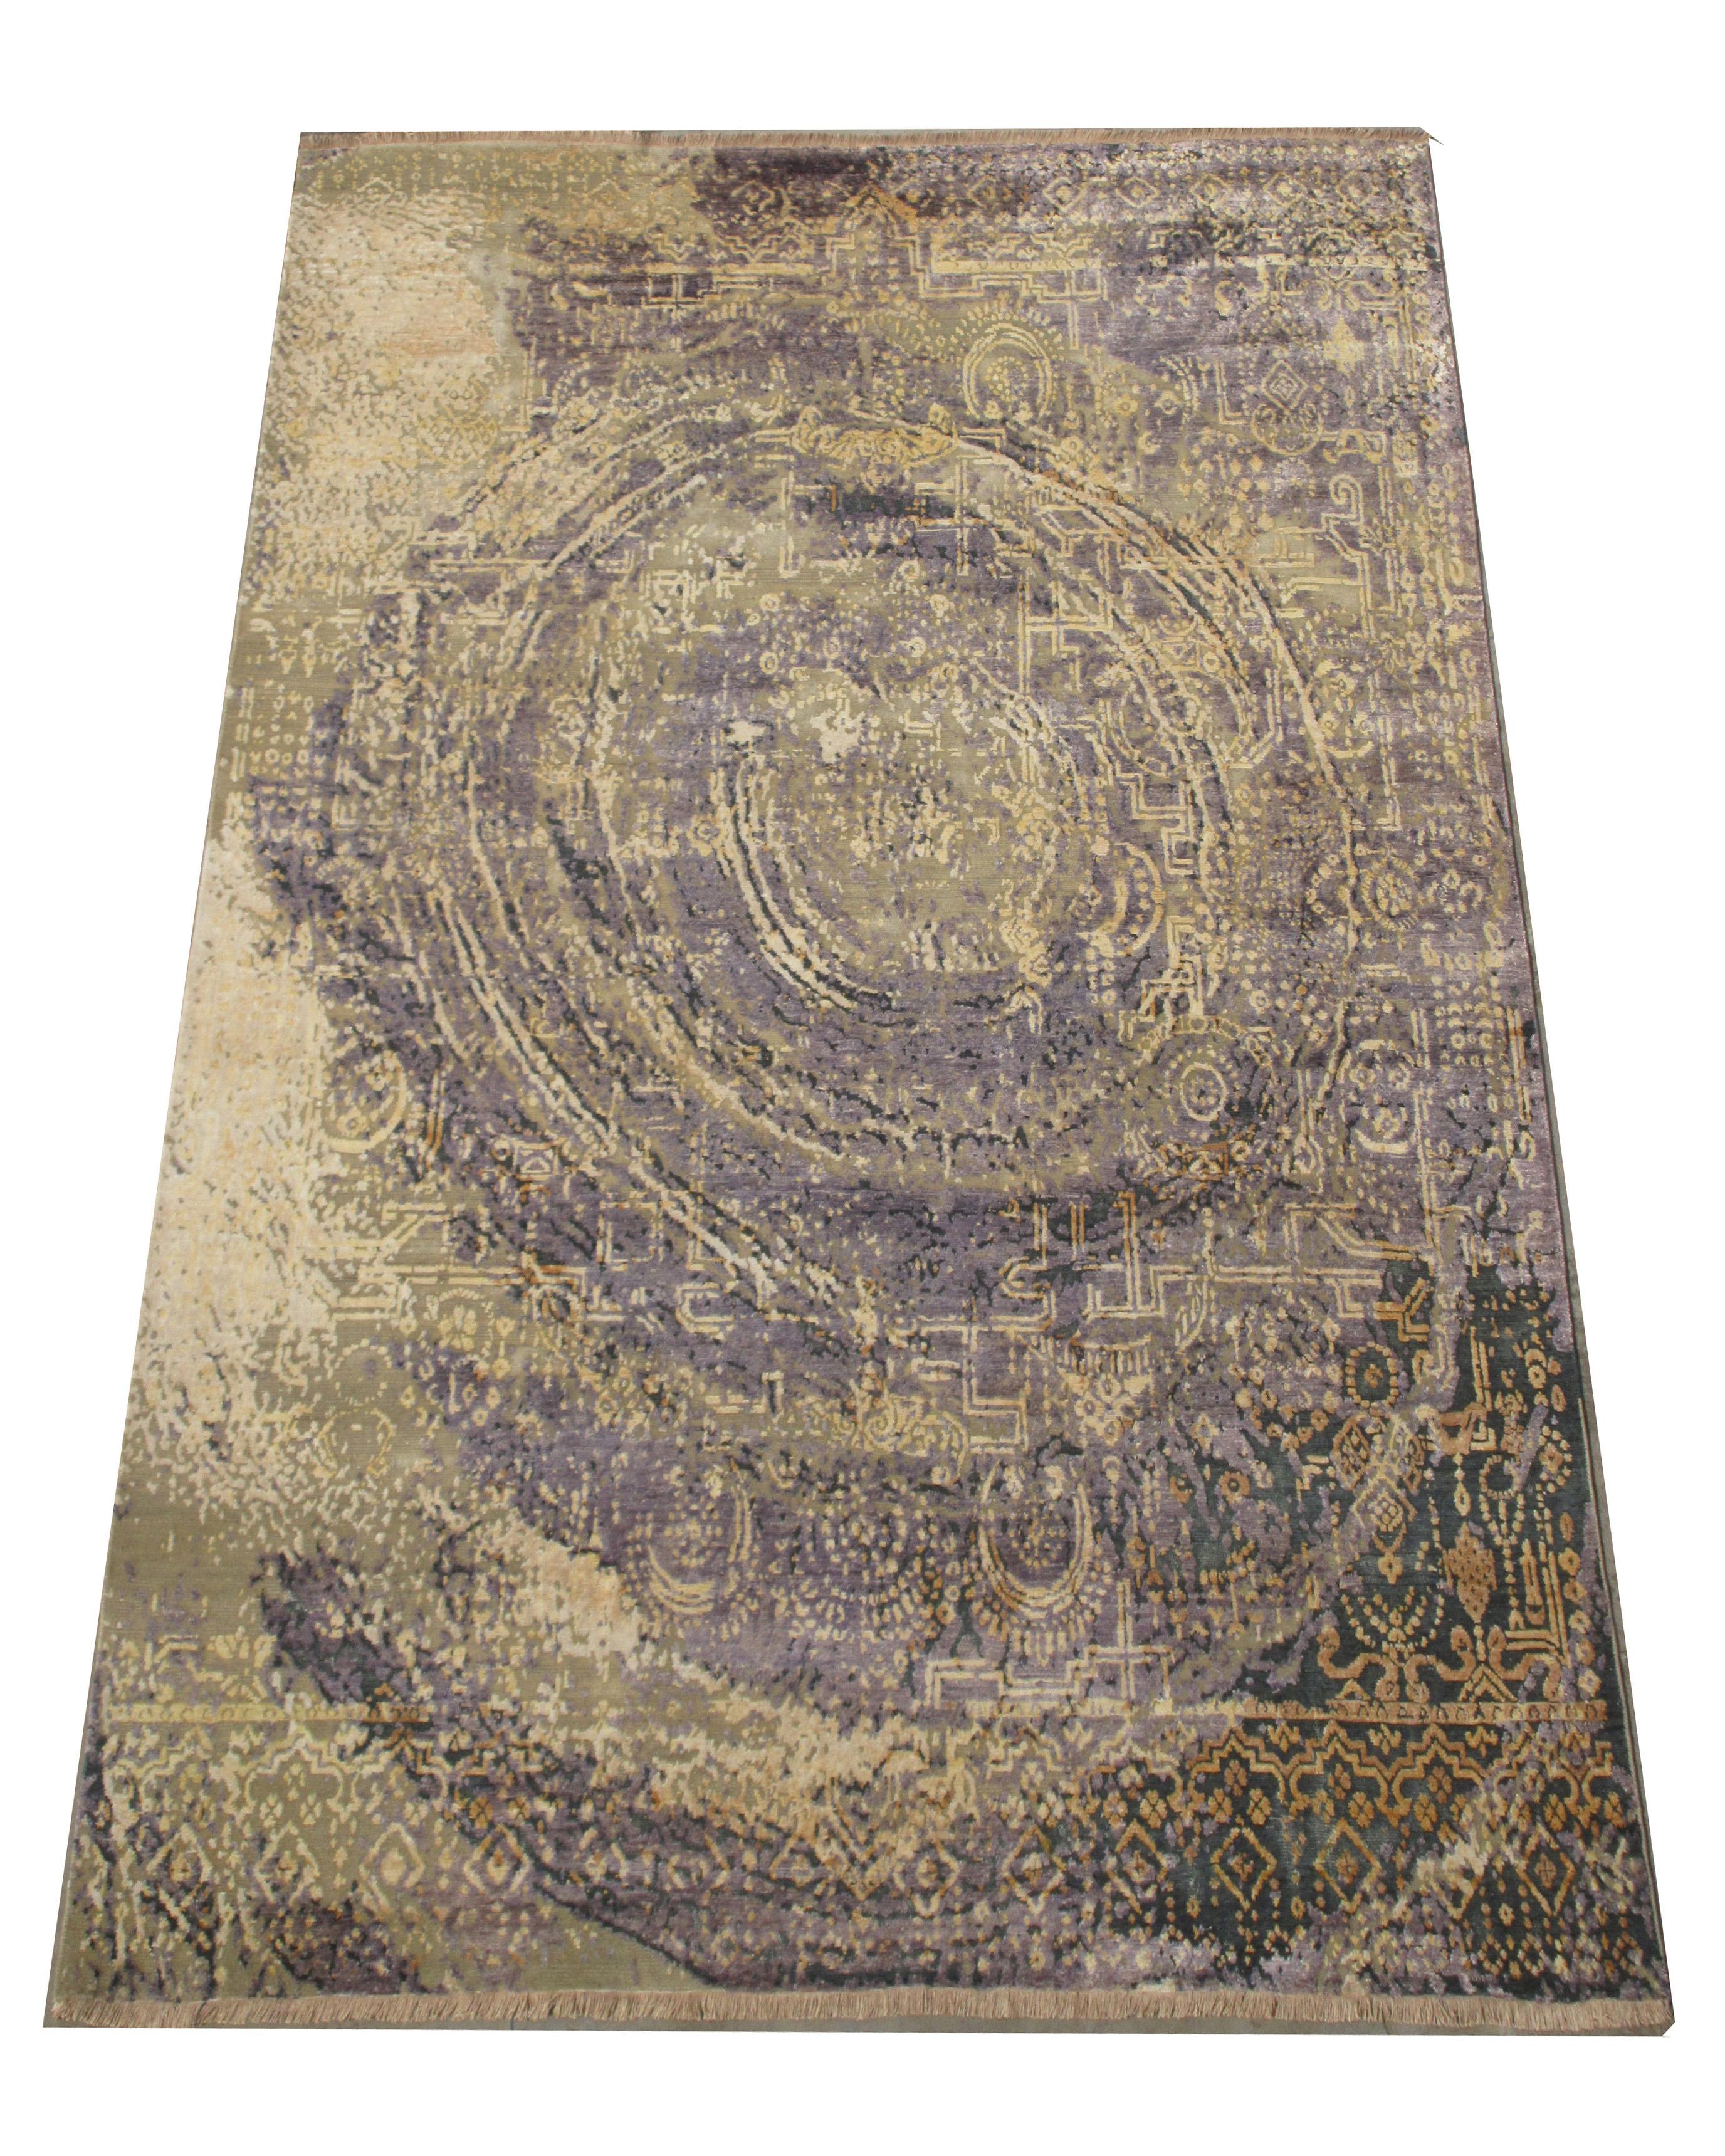 Hand knotted wool & silk pile on a cotton foundation. 

Oxidized Design.

Dimensions: 8'1